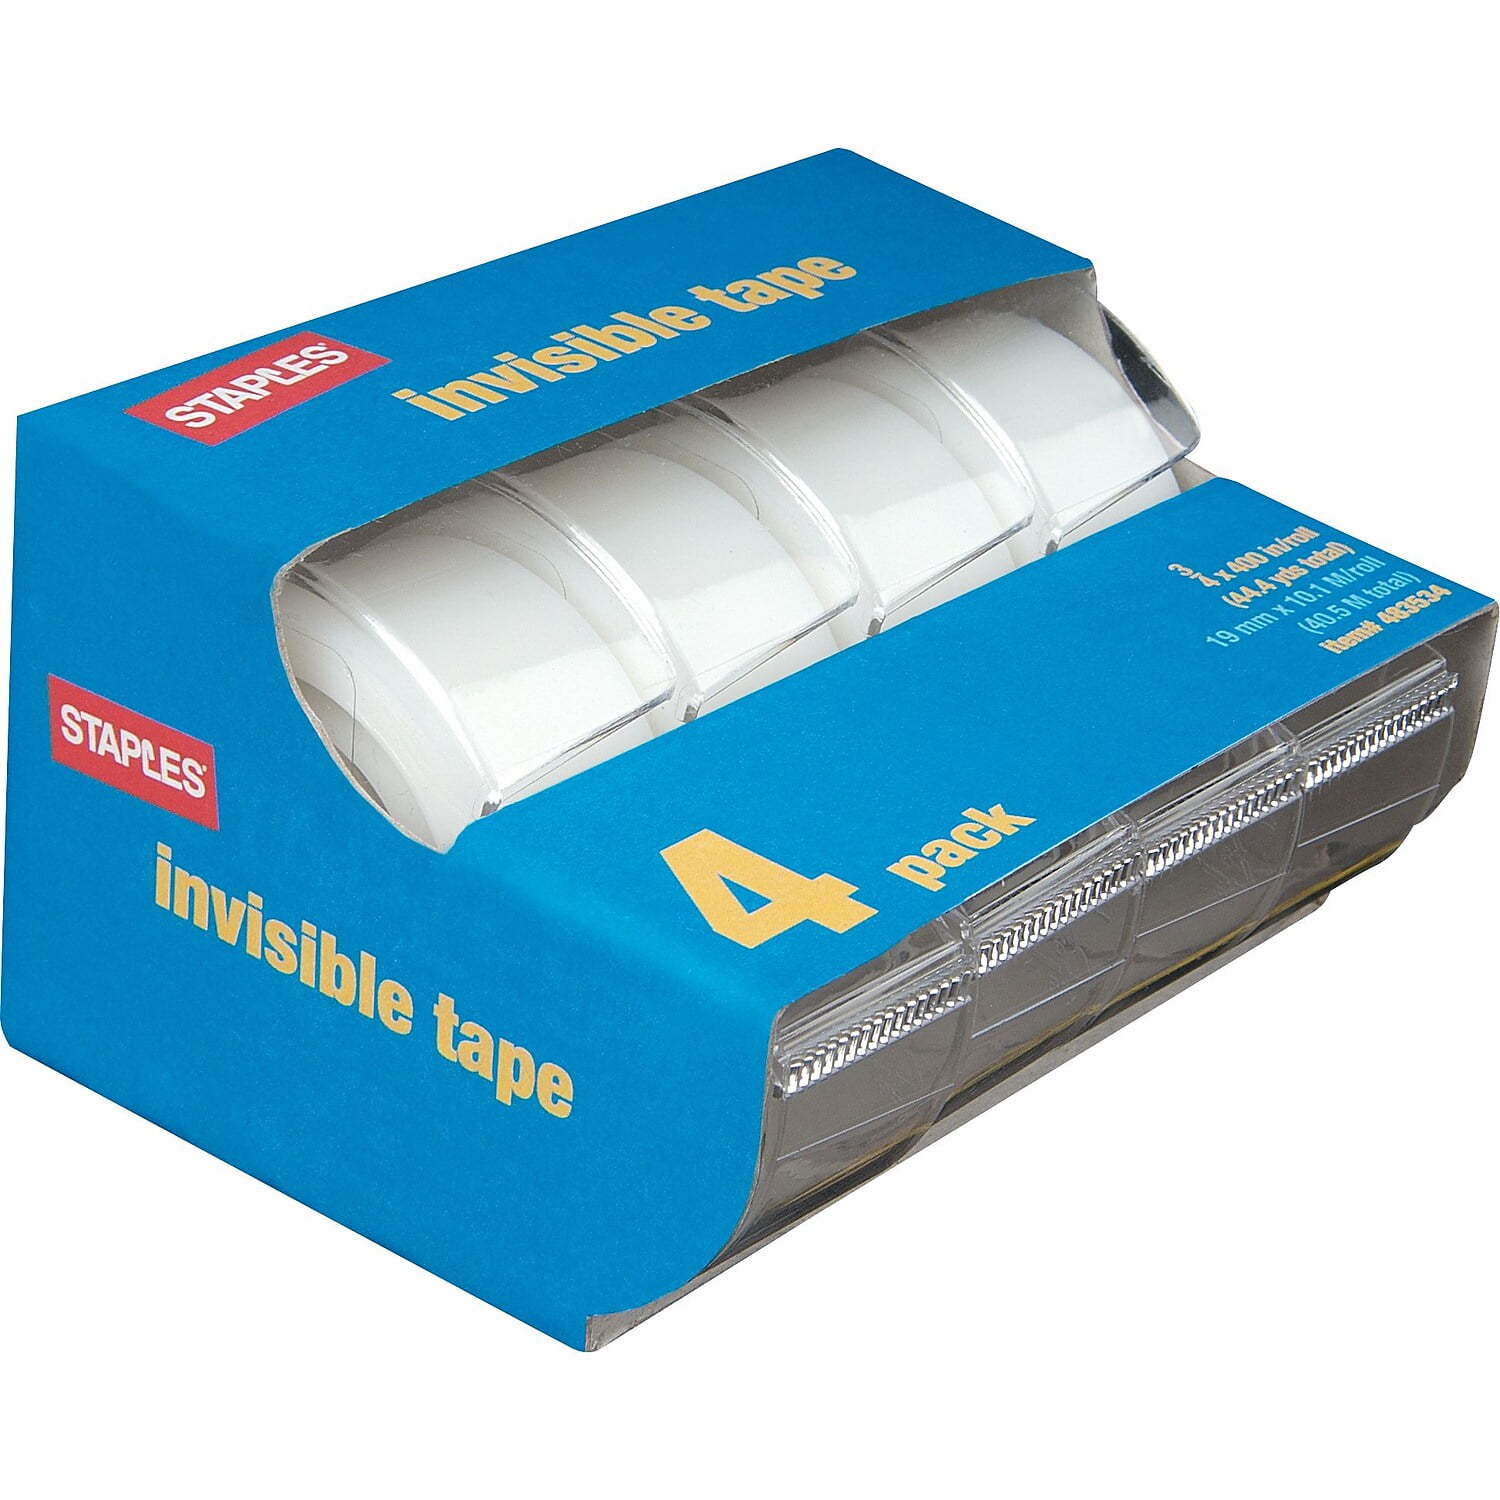 Staples Invisible Tape Caddies 3/4 x 11.1 yds 4/Pack (52384-P4D) 483534